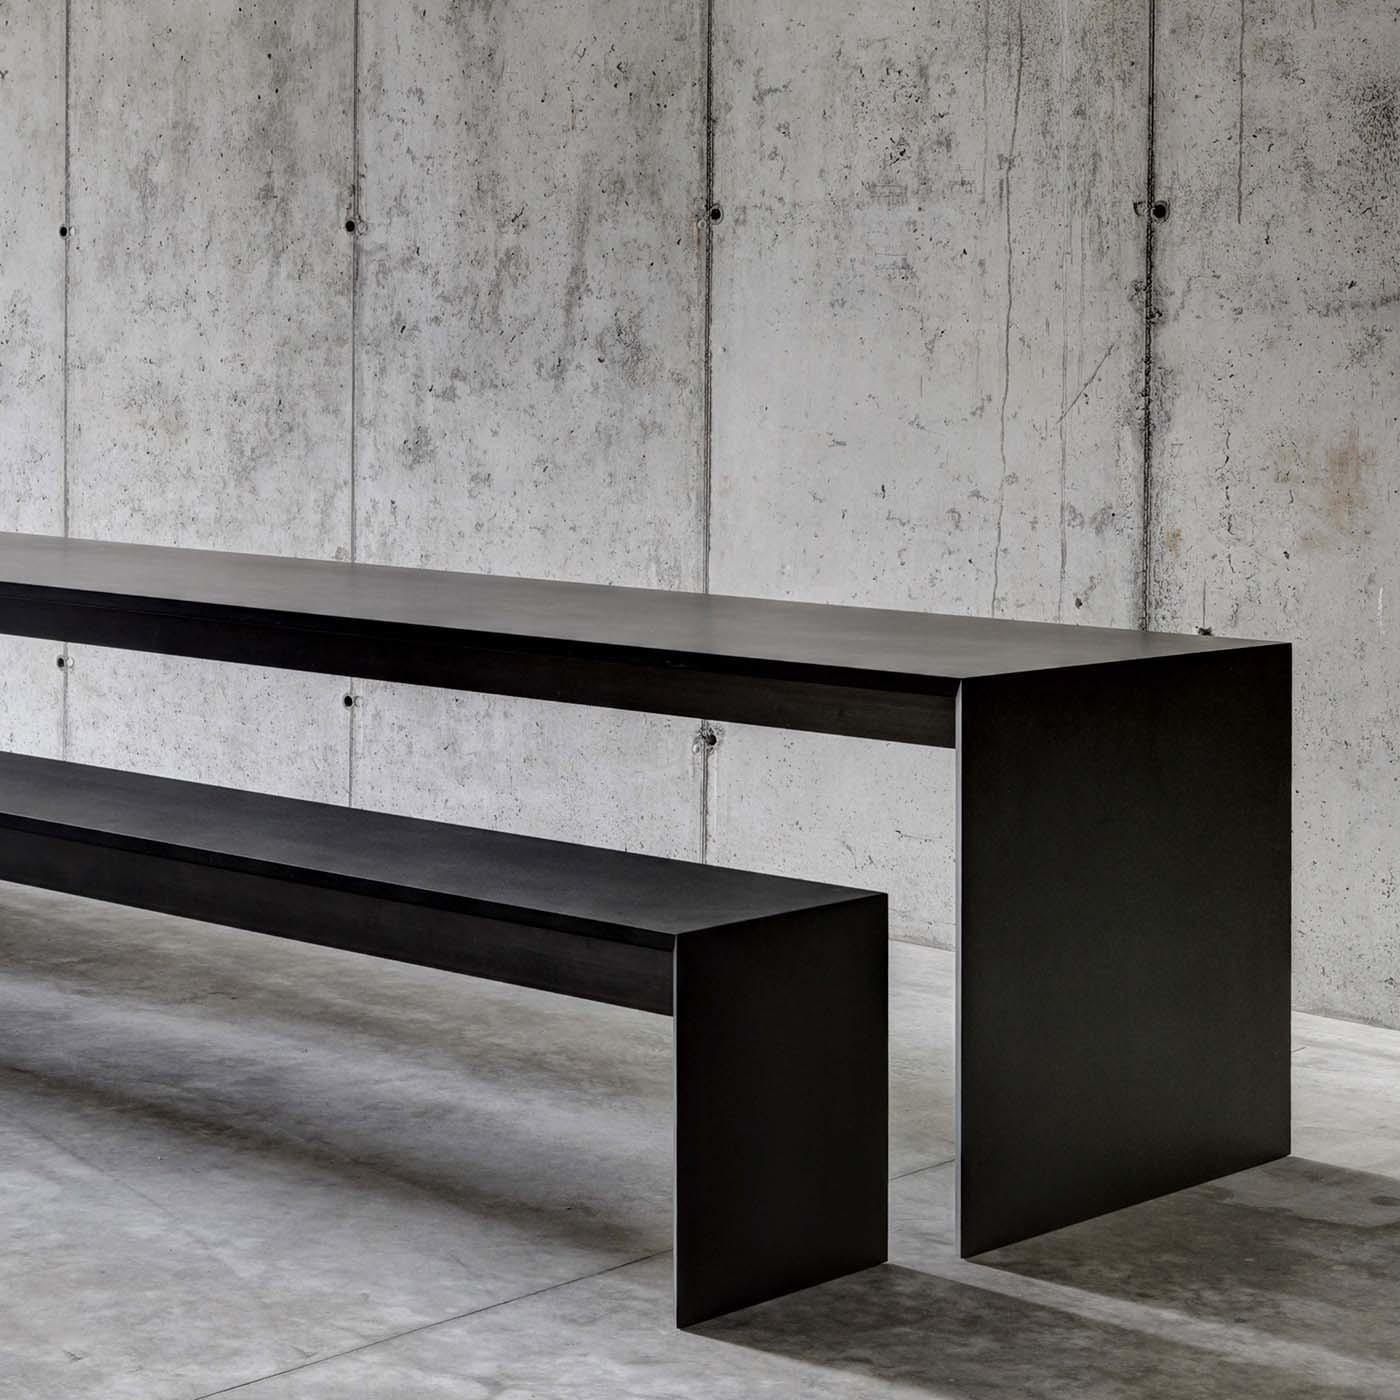 This stunning bench is designed by Studio Guscetti and will ideally complement the Ombrì 01 Table by Studio Guscetti. Its structure in Medium Density Fiberboard has the same black pastel matte finish as the table with 45-degree joints to add